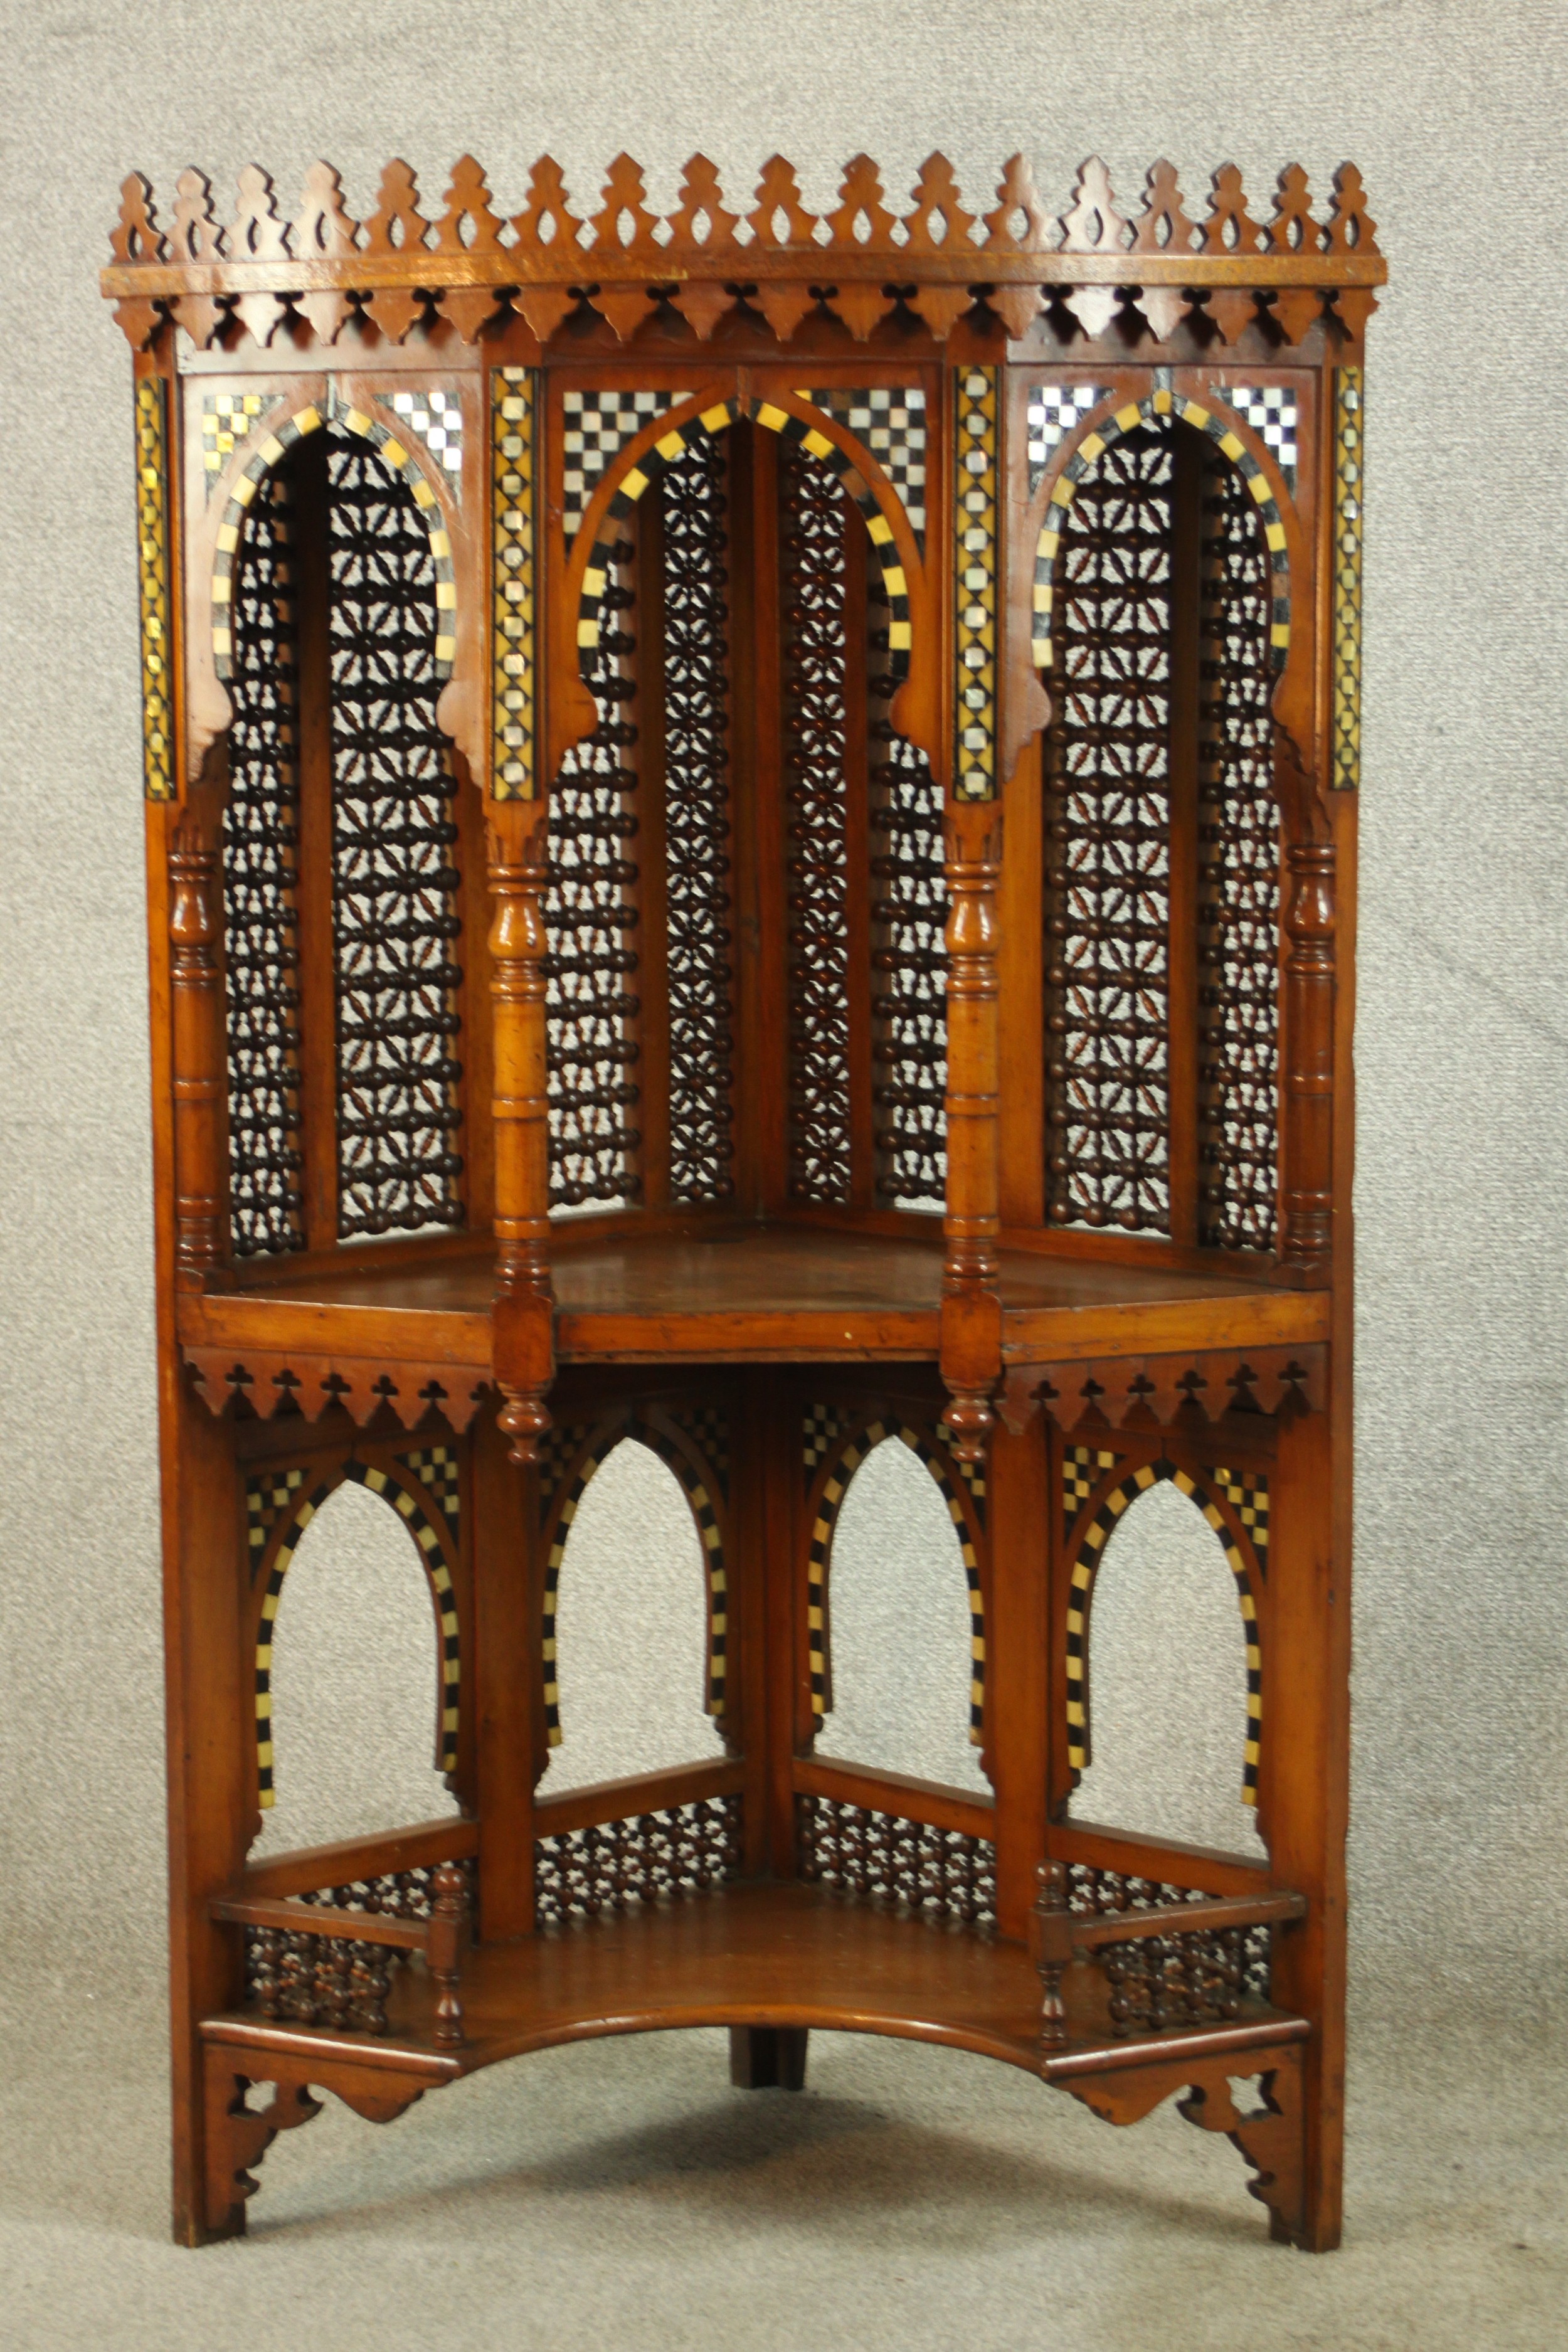 A set of 20th century bone inlaid hardwood, probably from Rajasthan, corner open hanging shelves. - Image 9 of 10